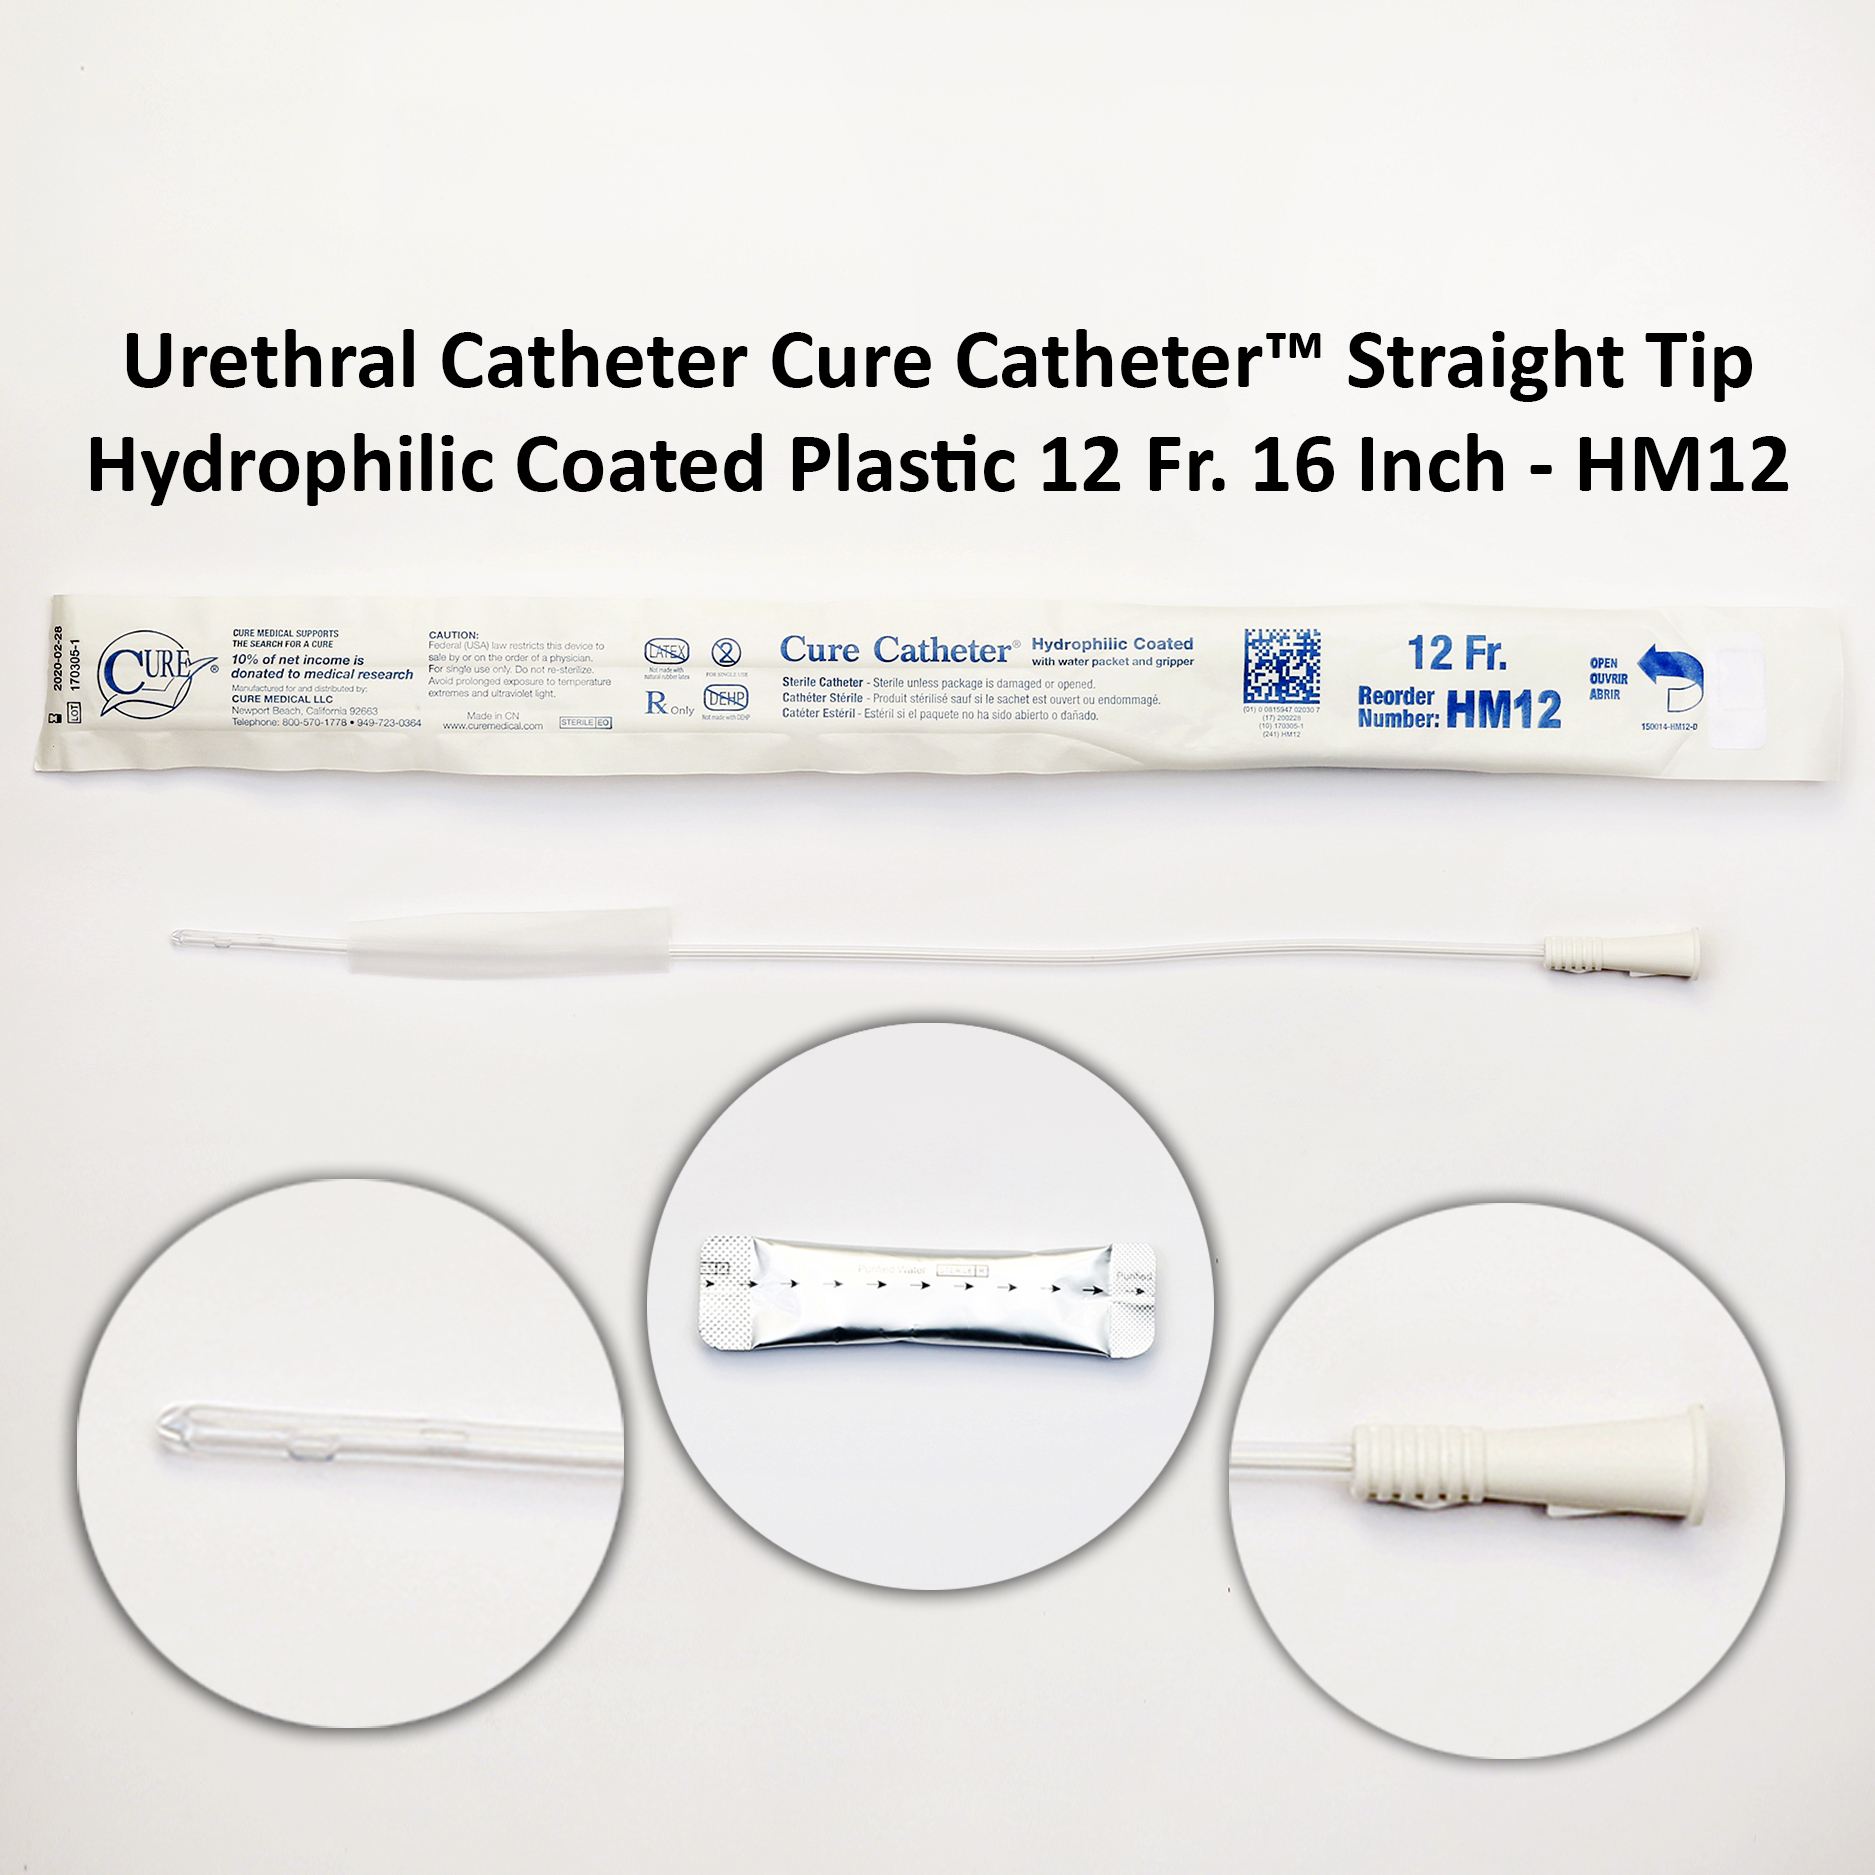 Urethral Catheter Cure Catheter™ Straight Tip Hydrophilic Coated Plastic 12 Fr. 16 Inch - HM12 Michigan | USA